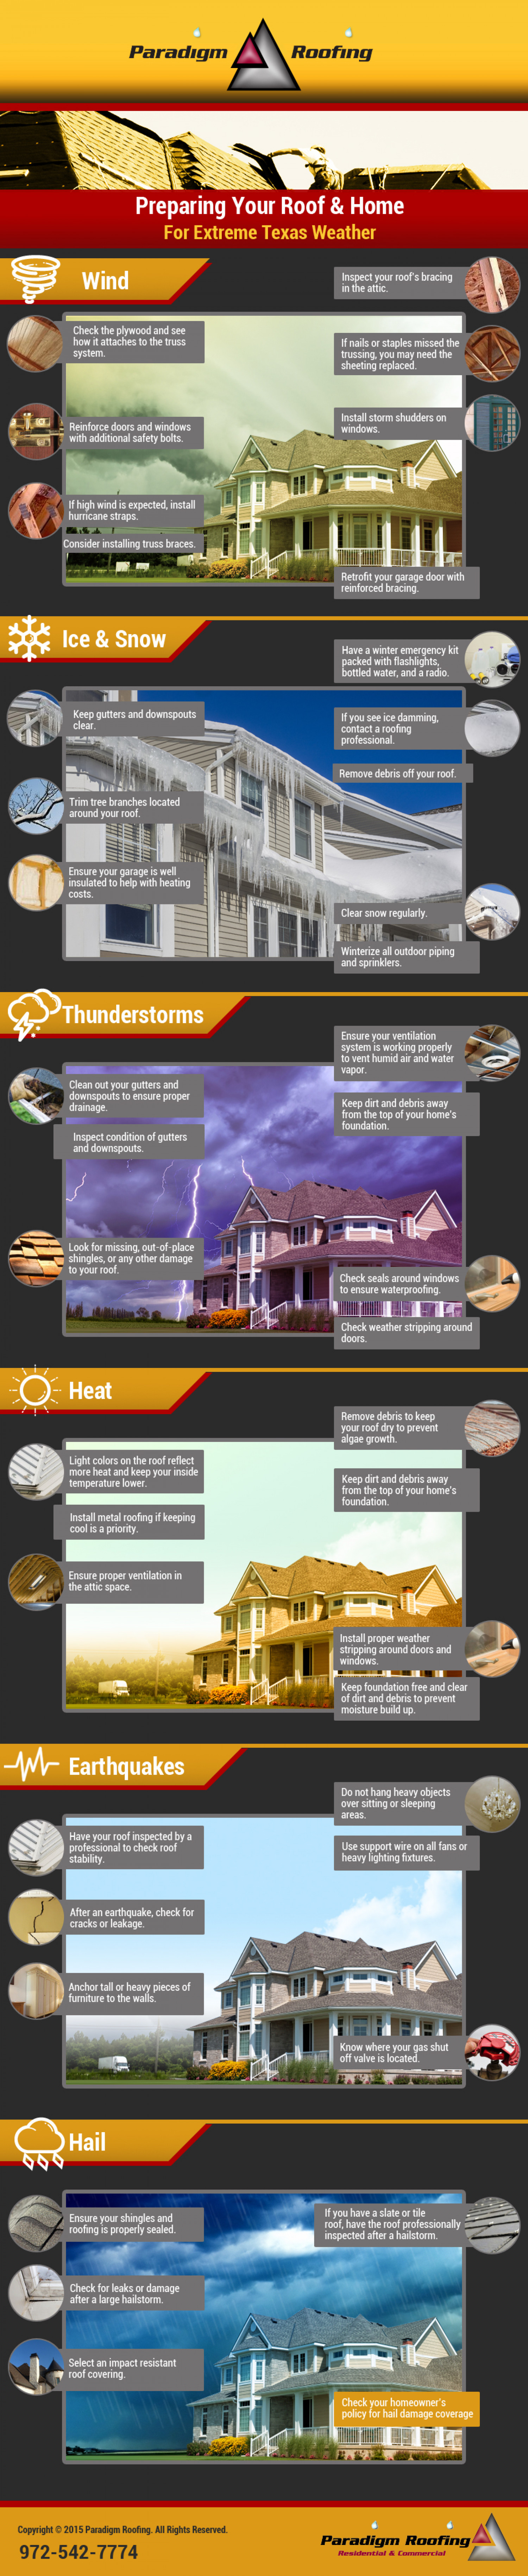  Protecting Your Roof in Extreme Texas Weather Infographic